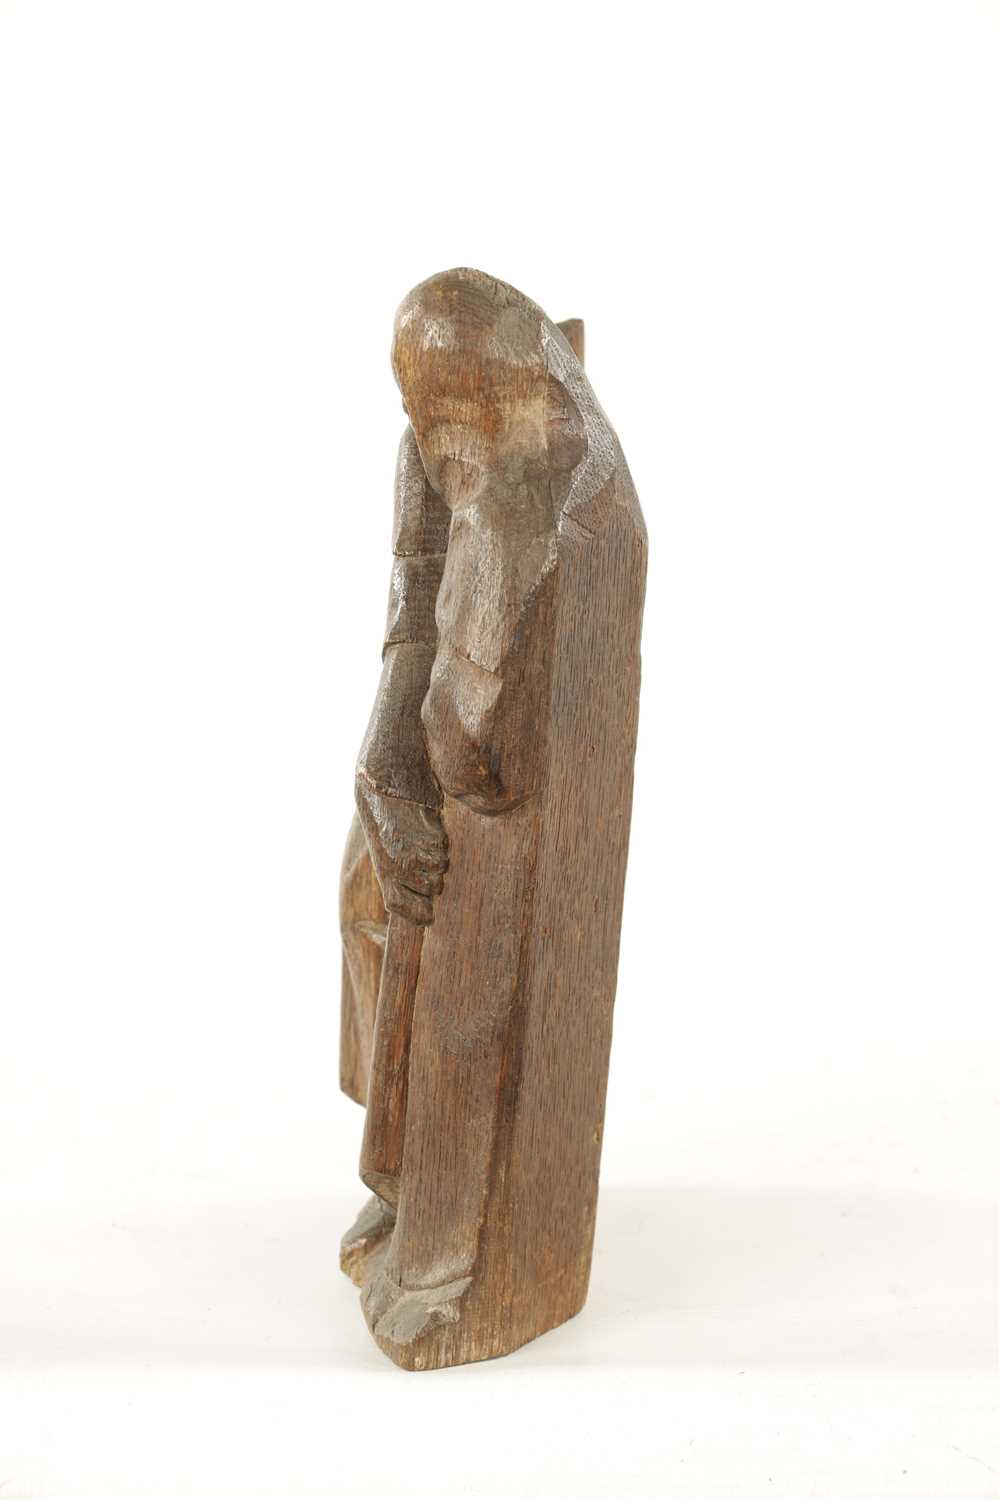 A 17TH CENTURY CARVED OAK FIGURAL SCULPTURE 'THE MURDER OF THOMAS BECKETT' - Image 6 of 6